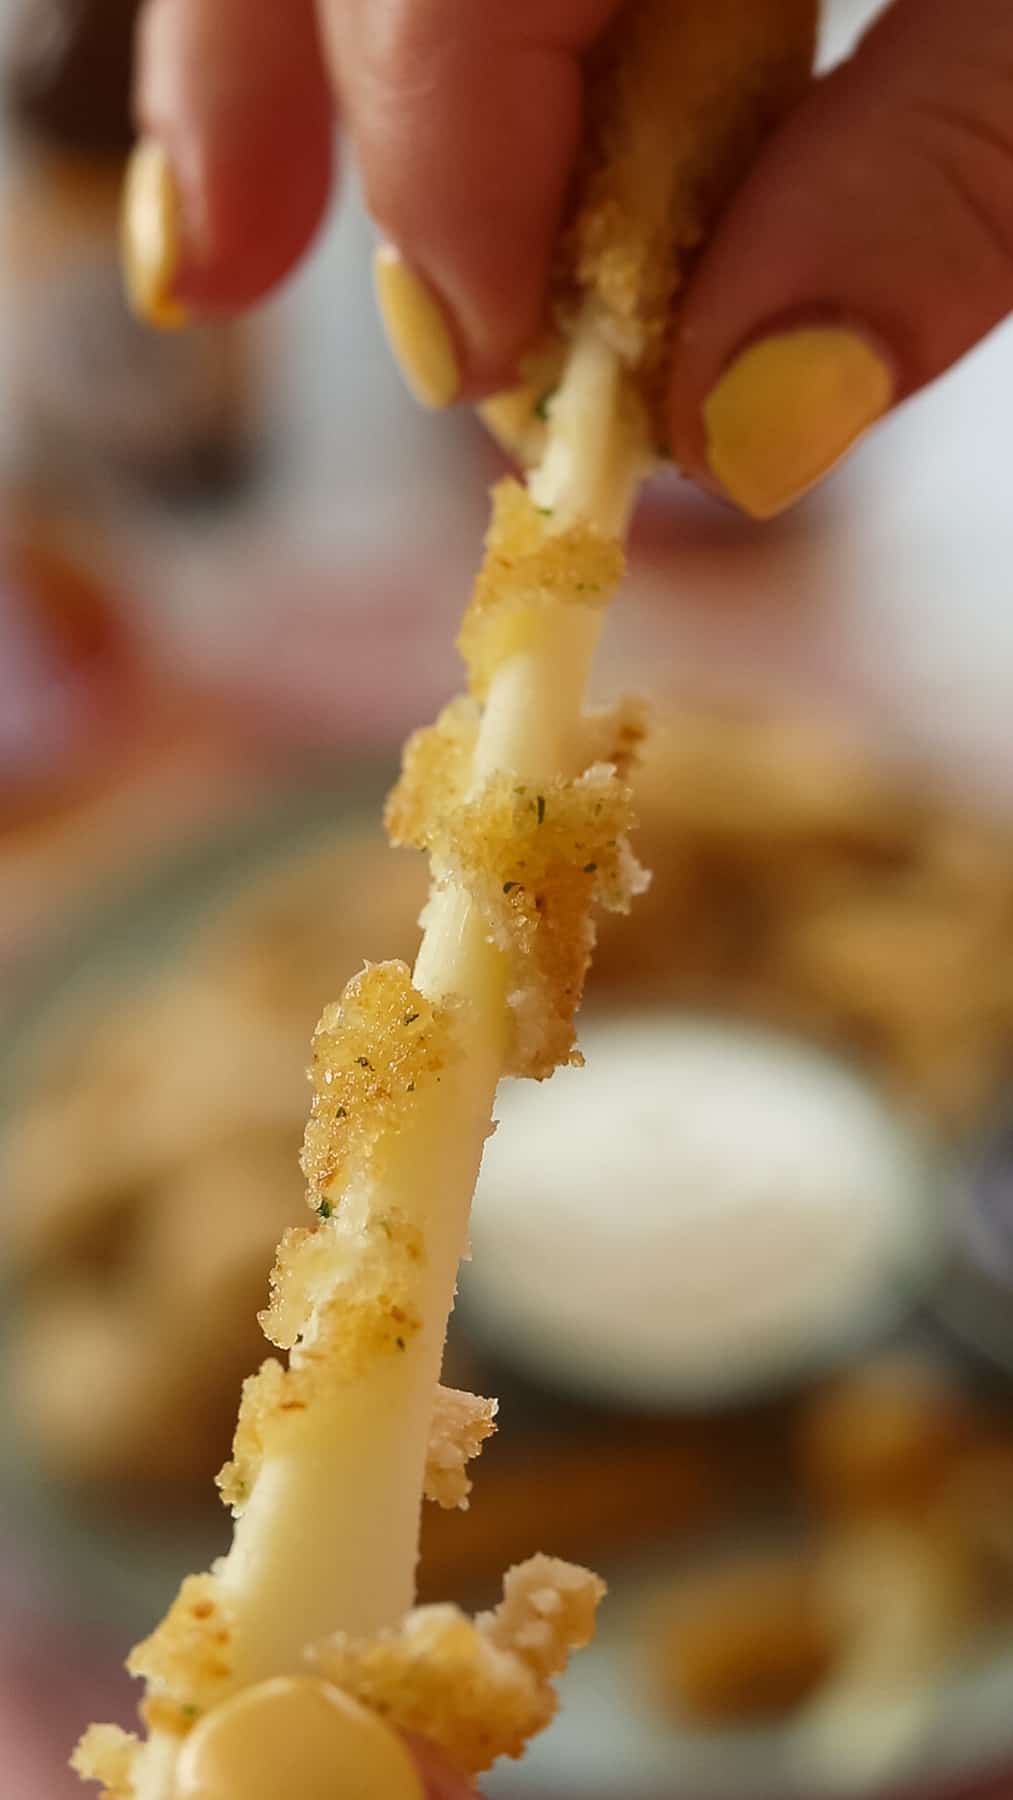 a mozzarella stick being pulled apart